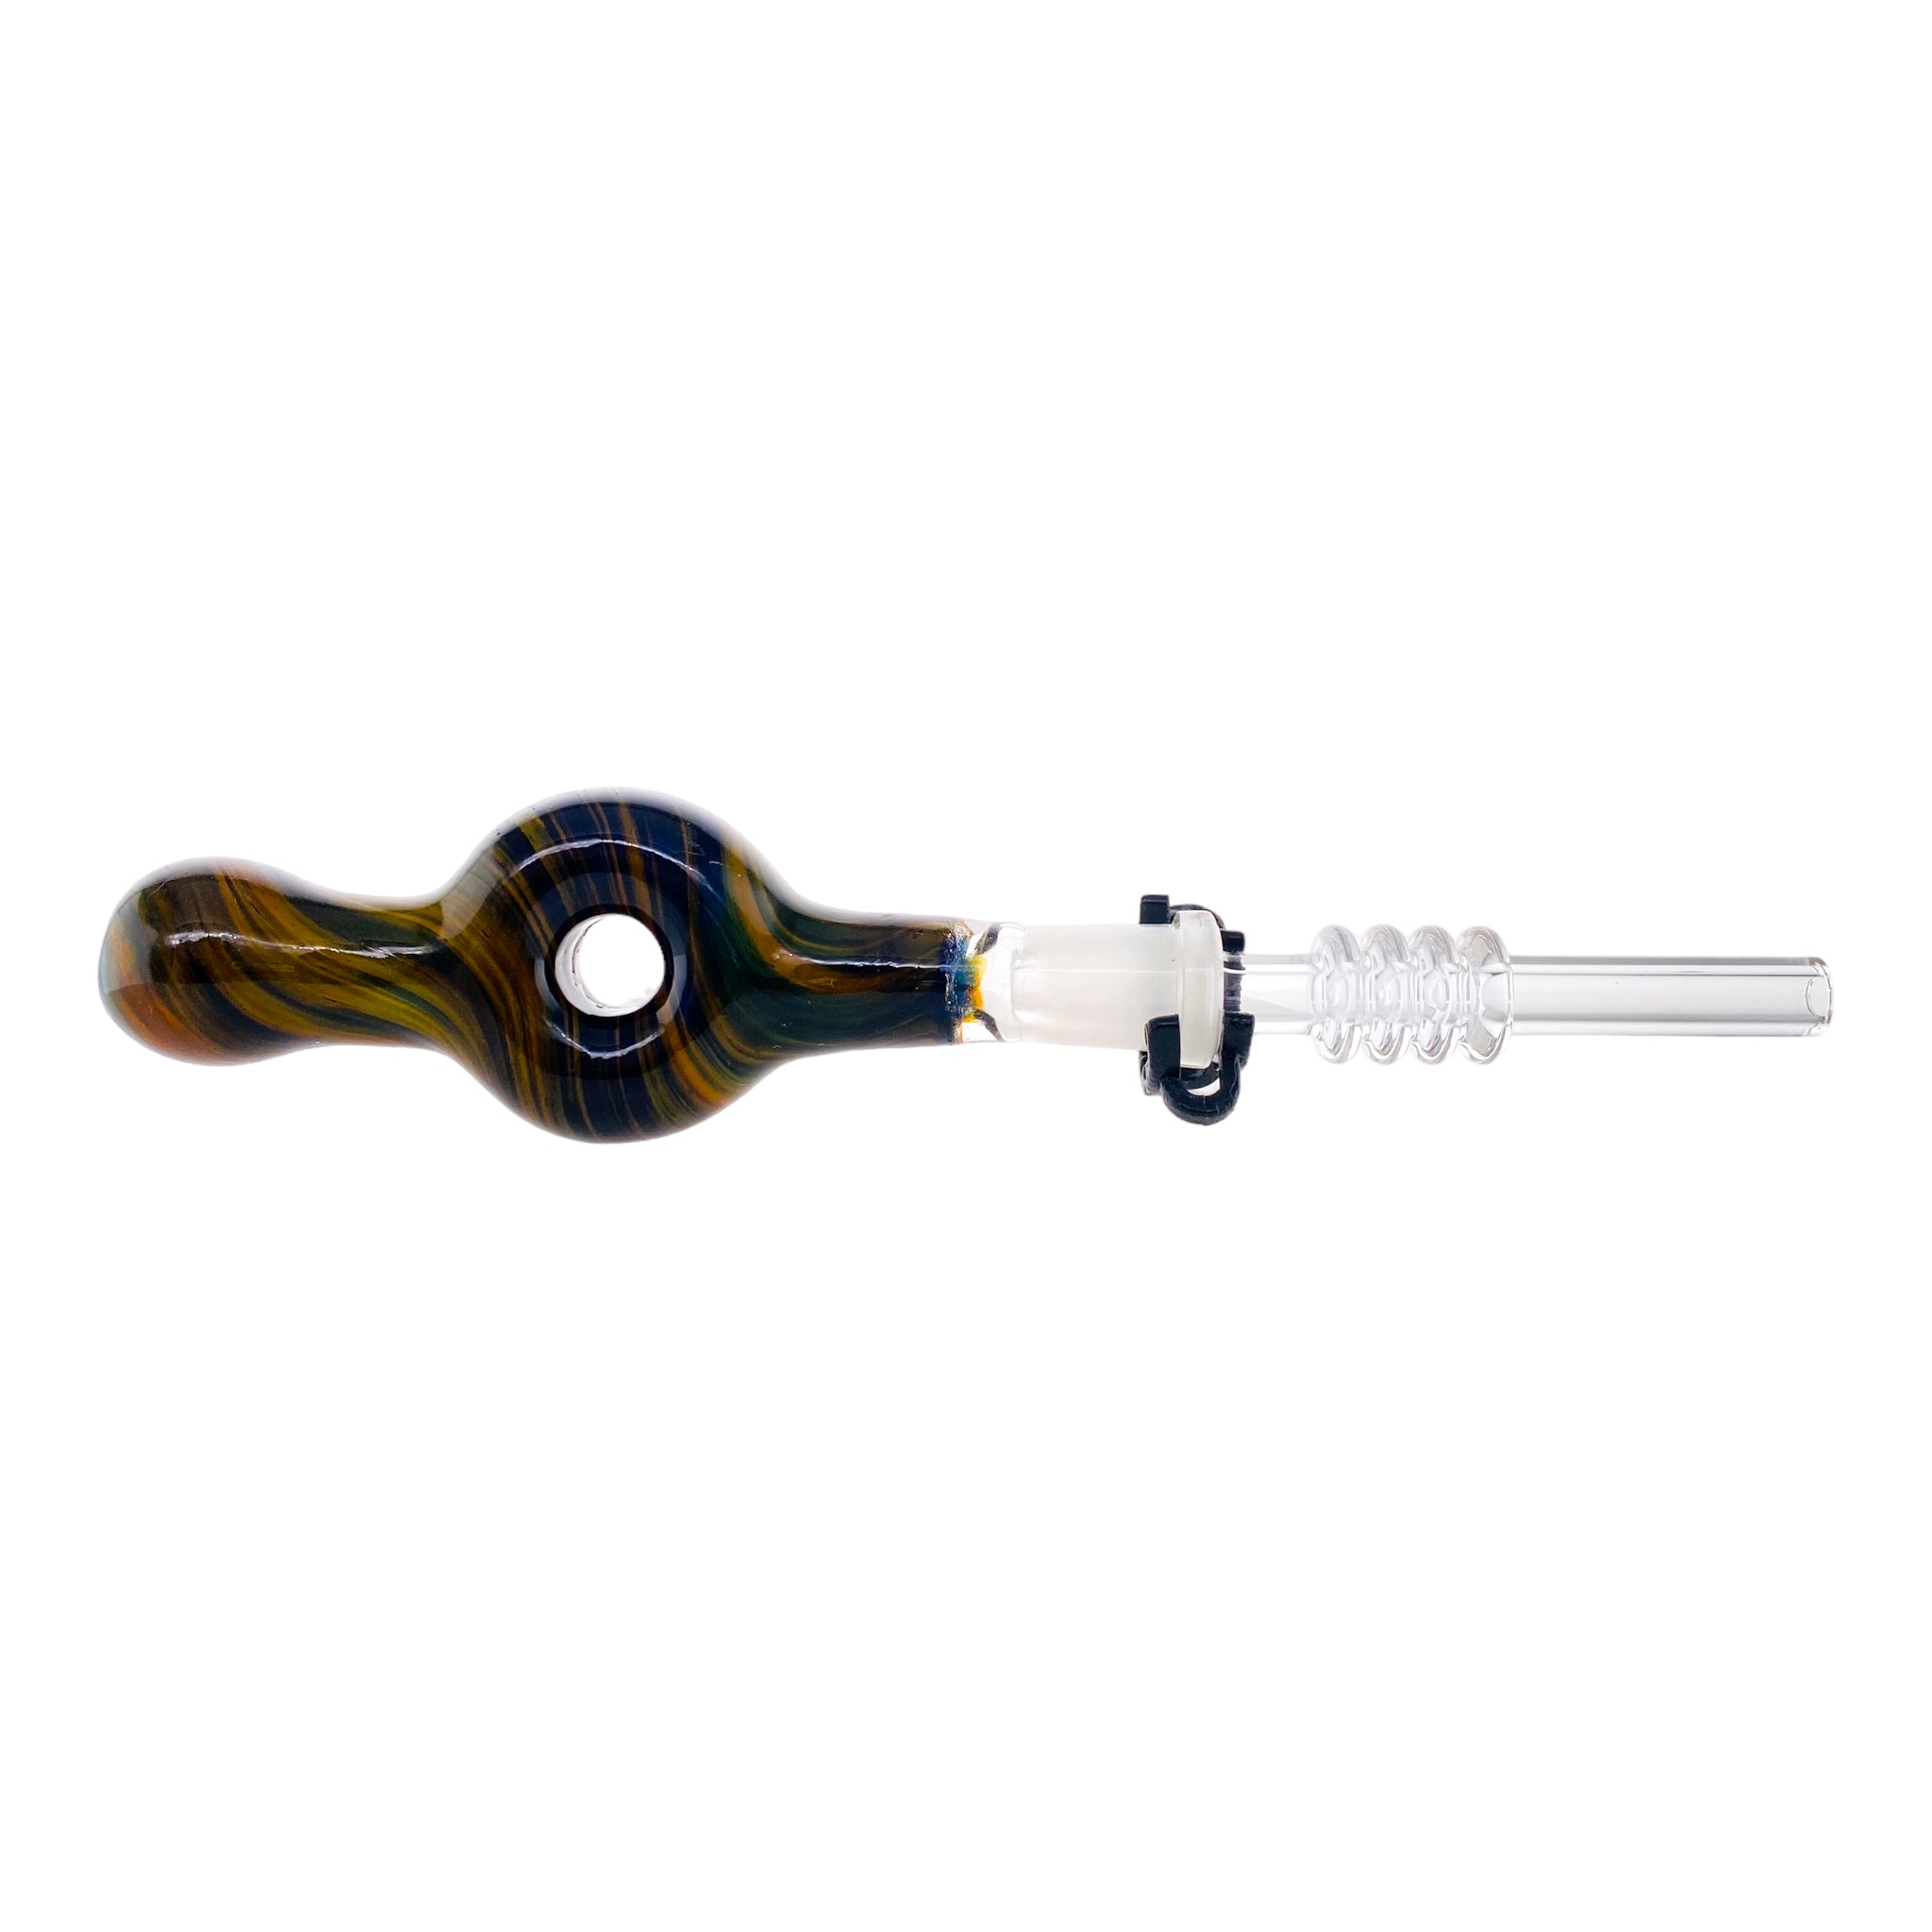 10mm Nectar Collector - Black With Fuming Inside Out Spiral Donut With 10mm Quartz Tip